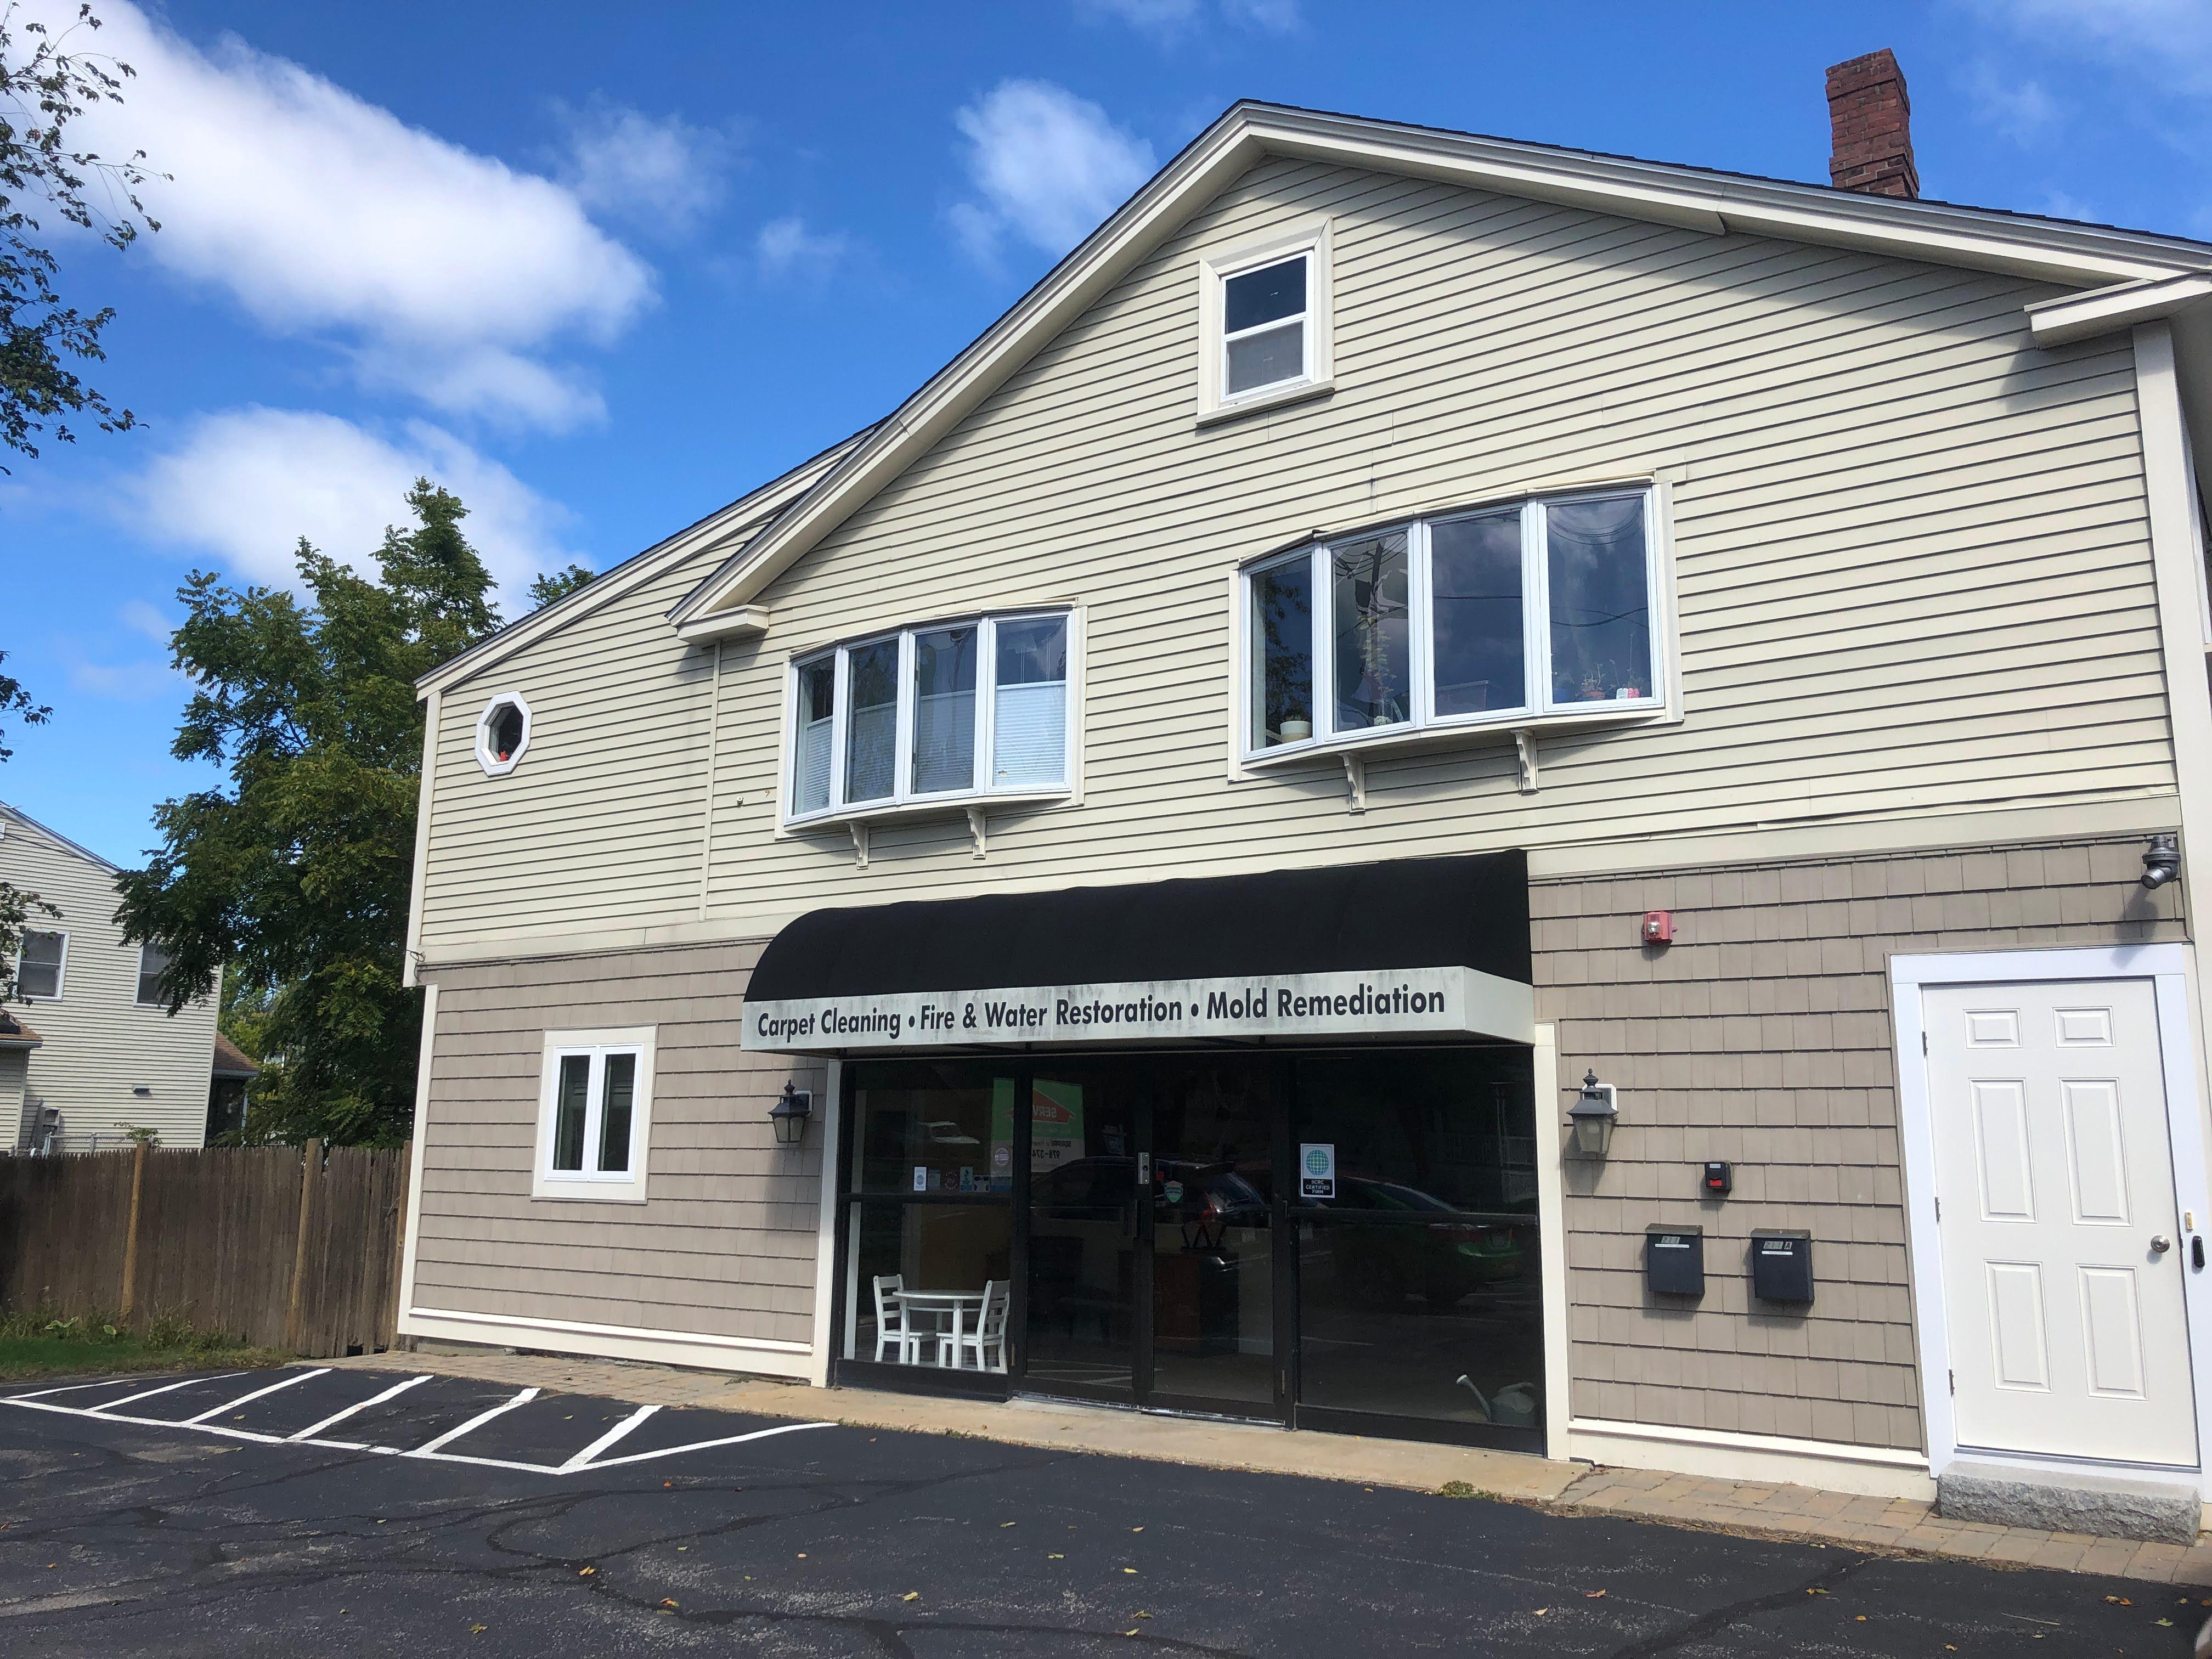 SERVPRO of Haverhill/Newburyport 's main office is located just outside of downtown Haverhill at 211 Broadway.